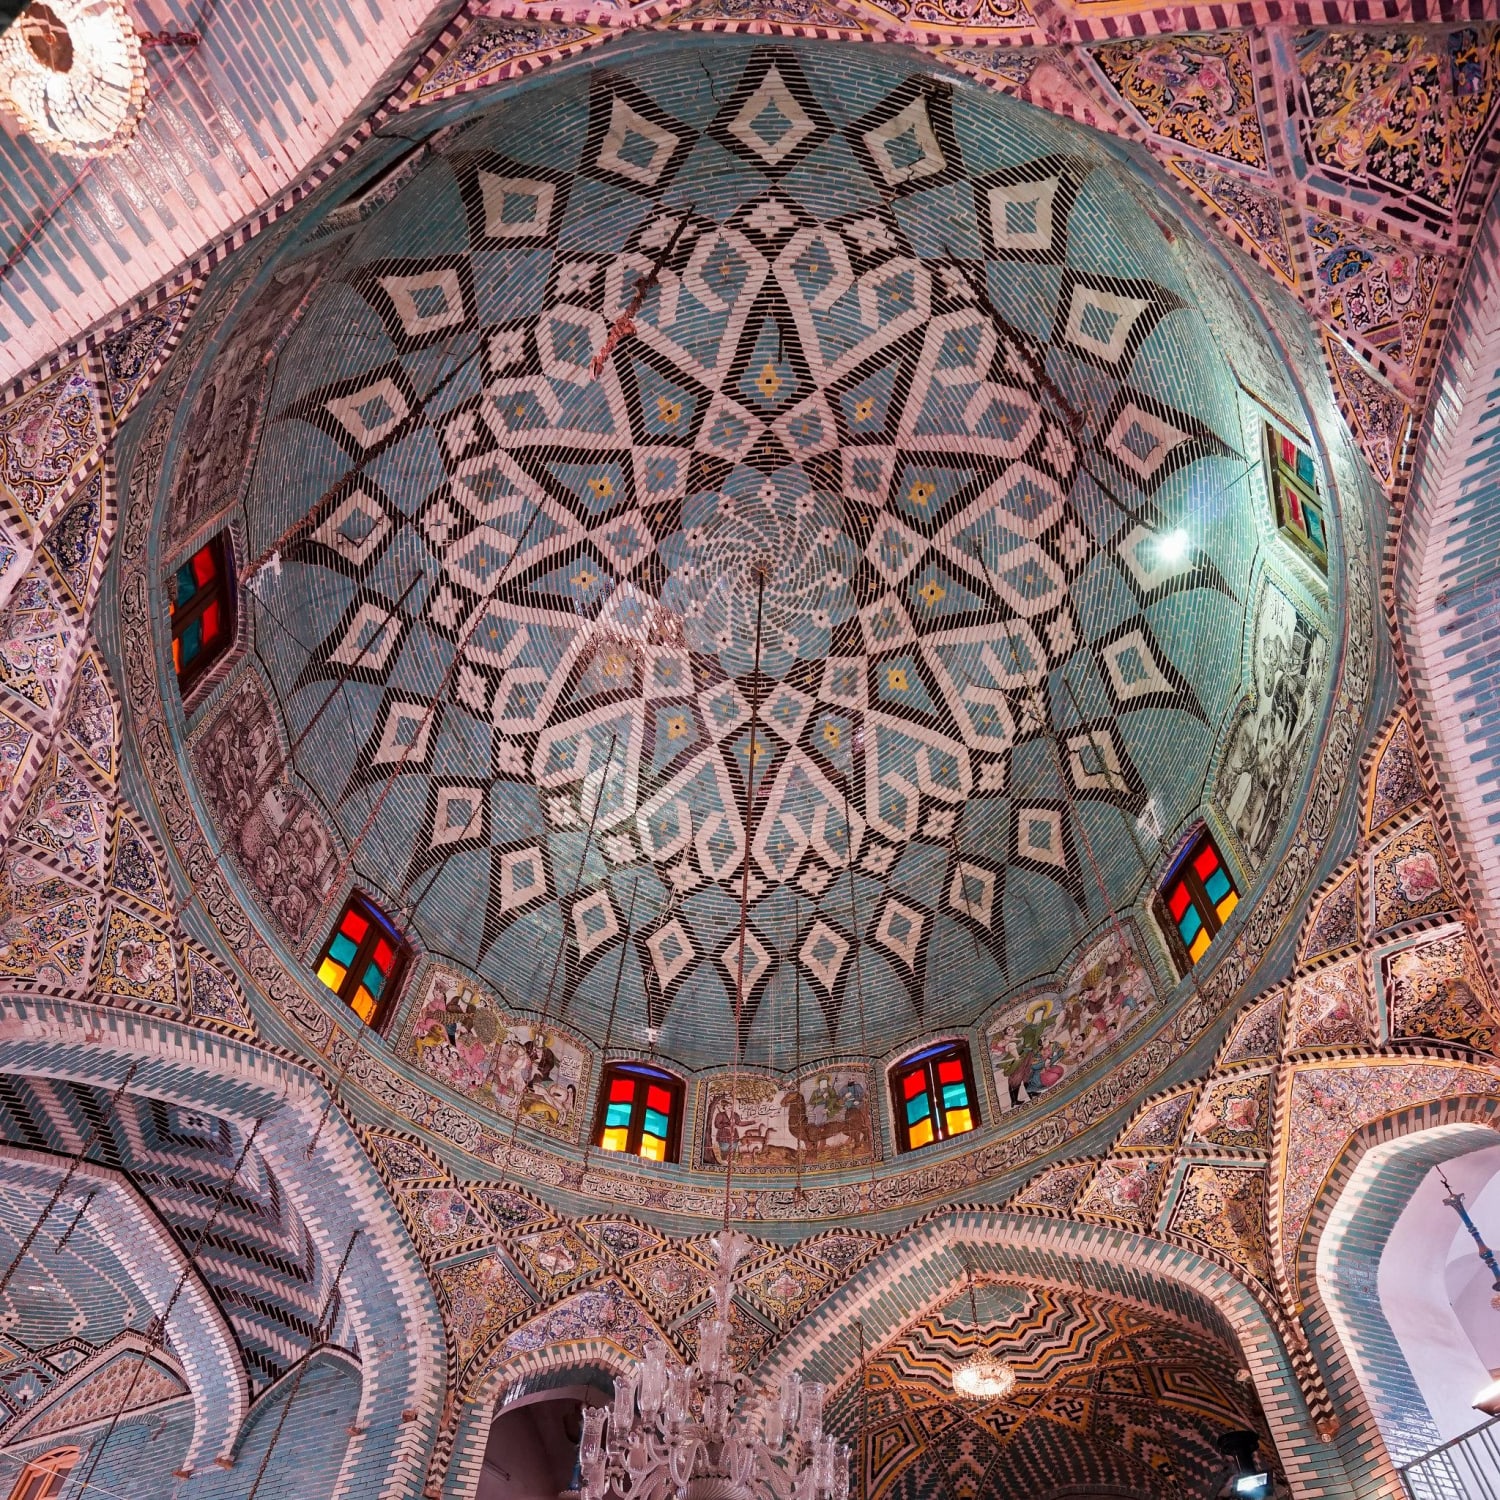 Tekyeh Moaven al-Molk, Kirmaşan (Kermanshah), Eastern-Kurdistan/North-Western Iran. This religious building consists of tens of thousands of unique, hand-painted tiles. It is the only Islamic building where depictions of humans are extensively used. More pics & info in comments!